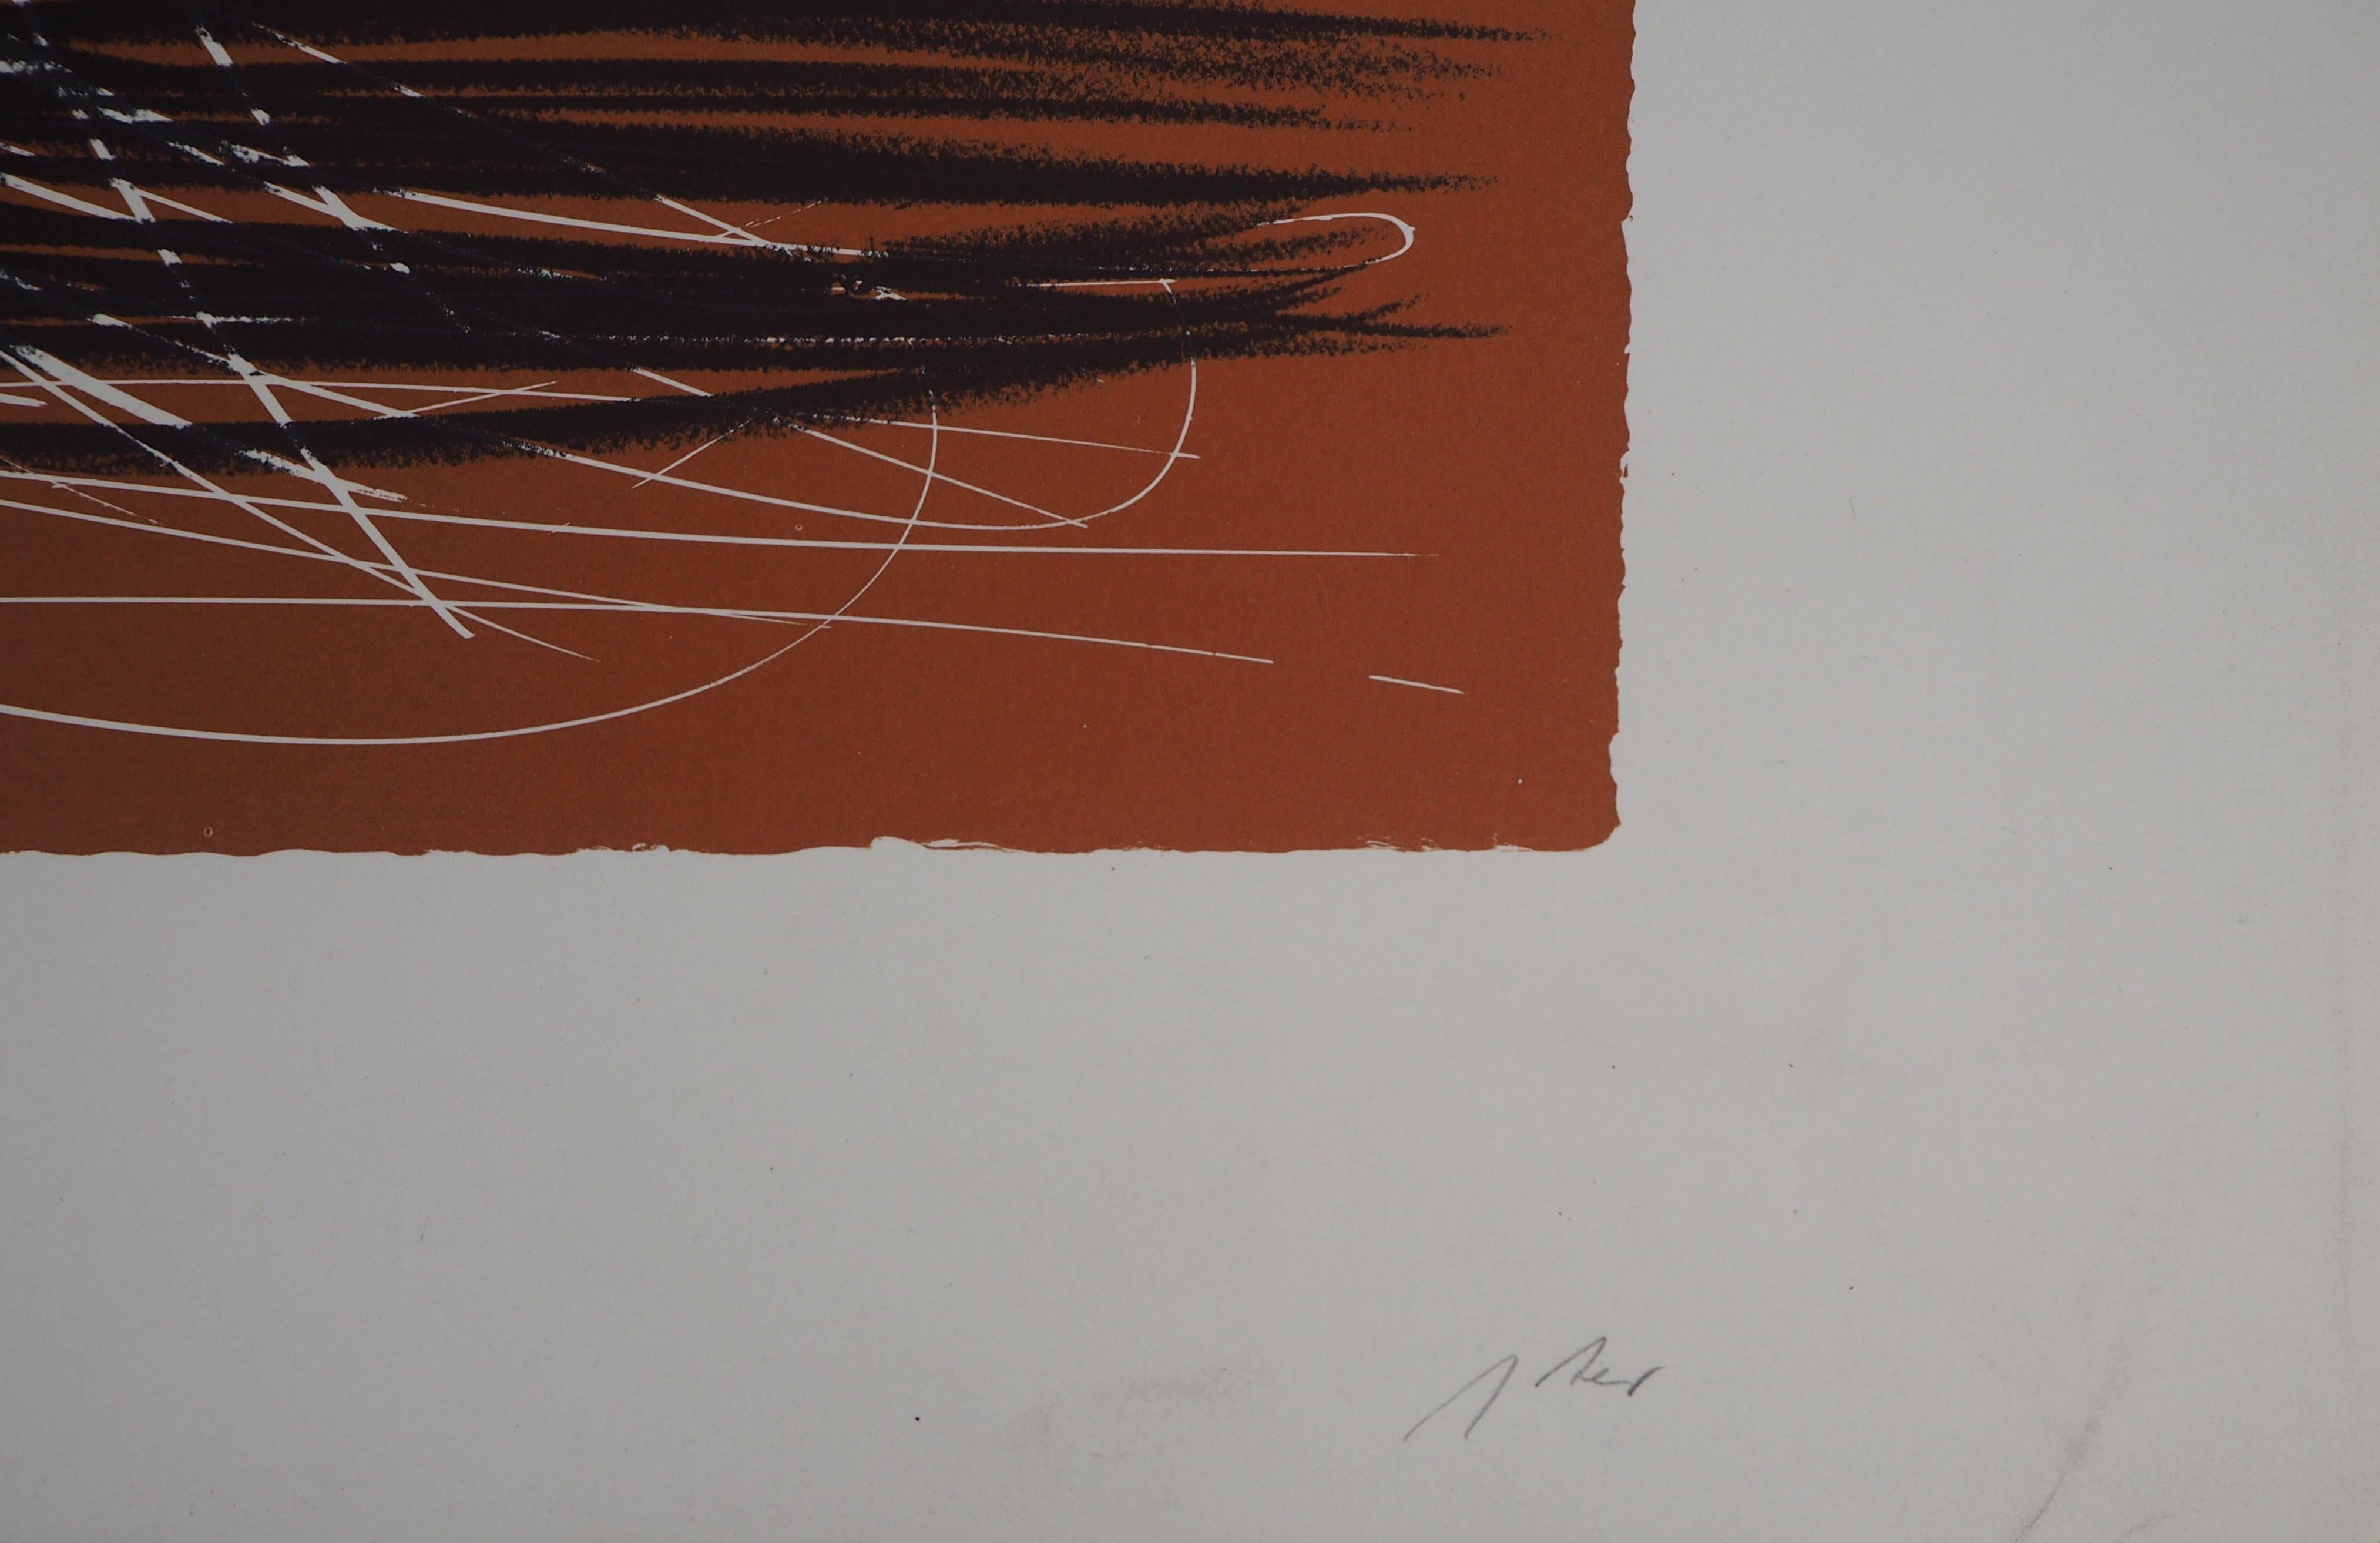 Brown Abstract Composition - Original Lithograph, 1971 - Gray Abstract Print by Hans Hartung